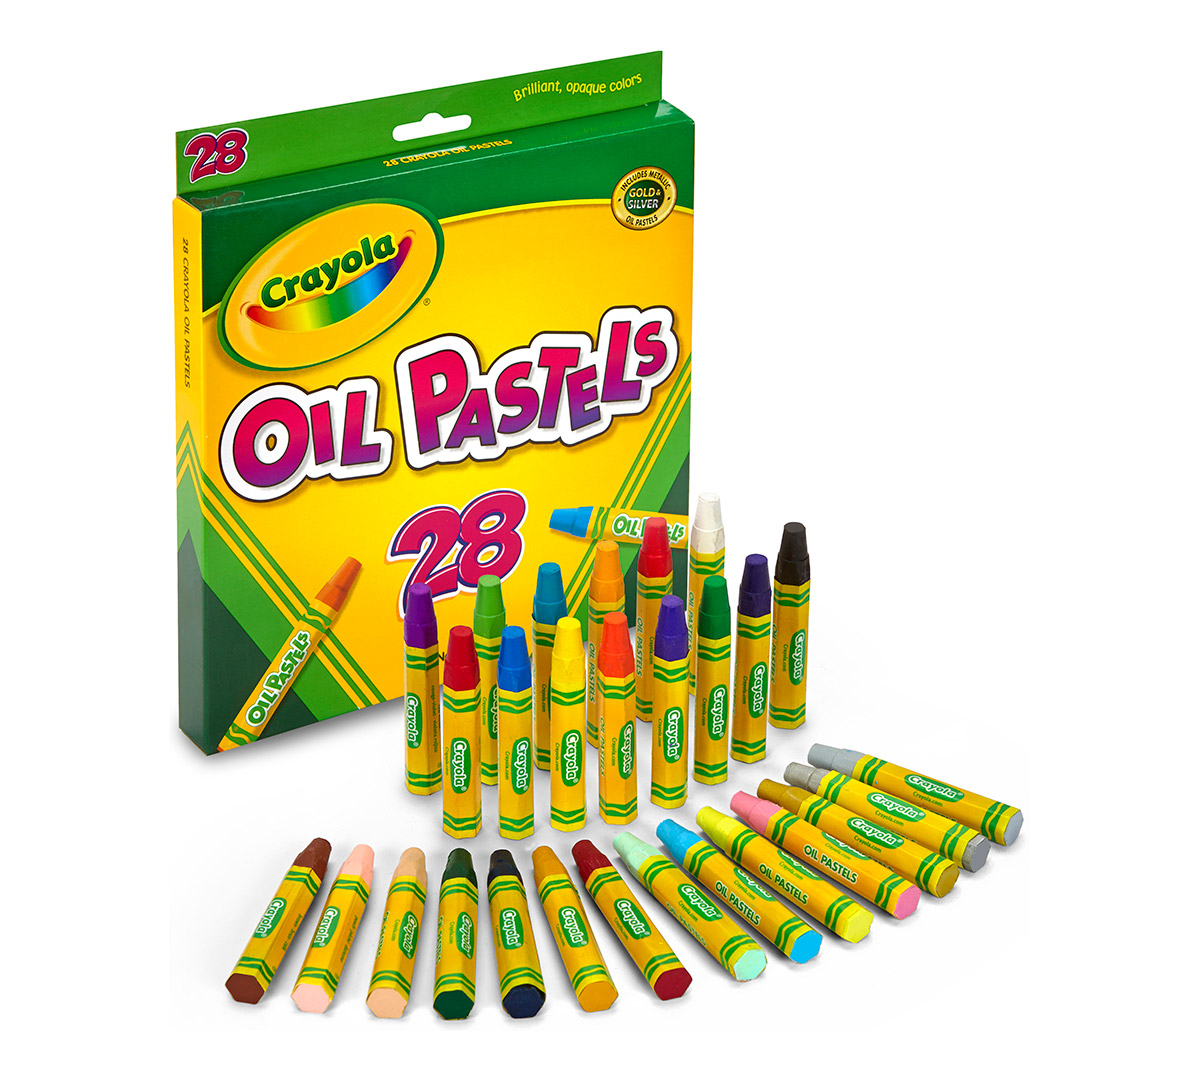 Soft pastel (Pastel crayons) in  online store